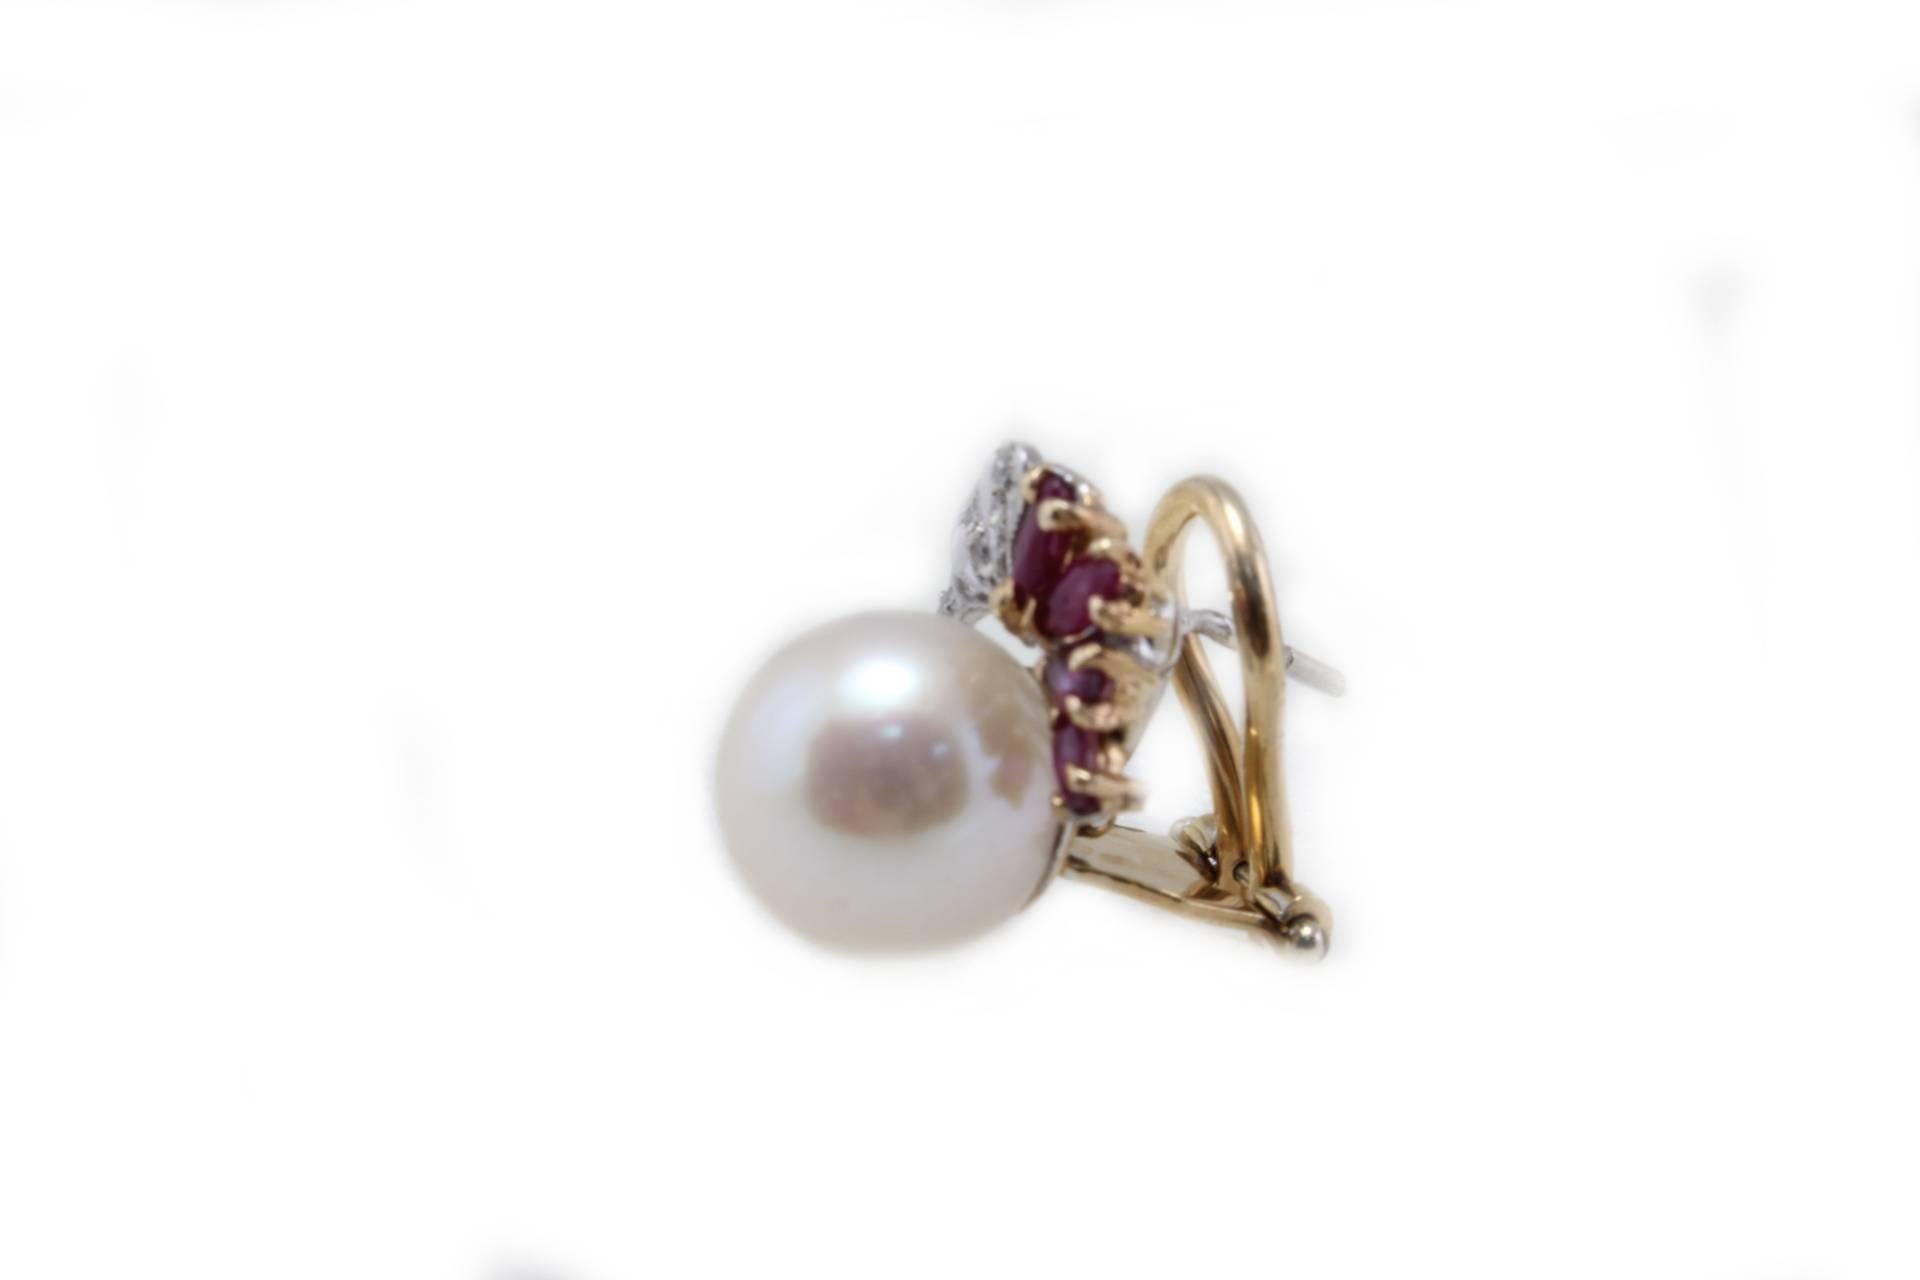 Stud earrings in 14kt white and yellow gold with diamonds, rubies and sea pearls.
Diamonds 0.10 ct
Rubies 0.68 ct 
Pearls 2.80 gr /10-11 mm
Tot.Weight 7.10 gr
R.F gurr 